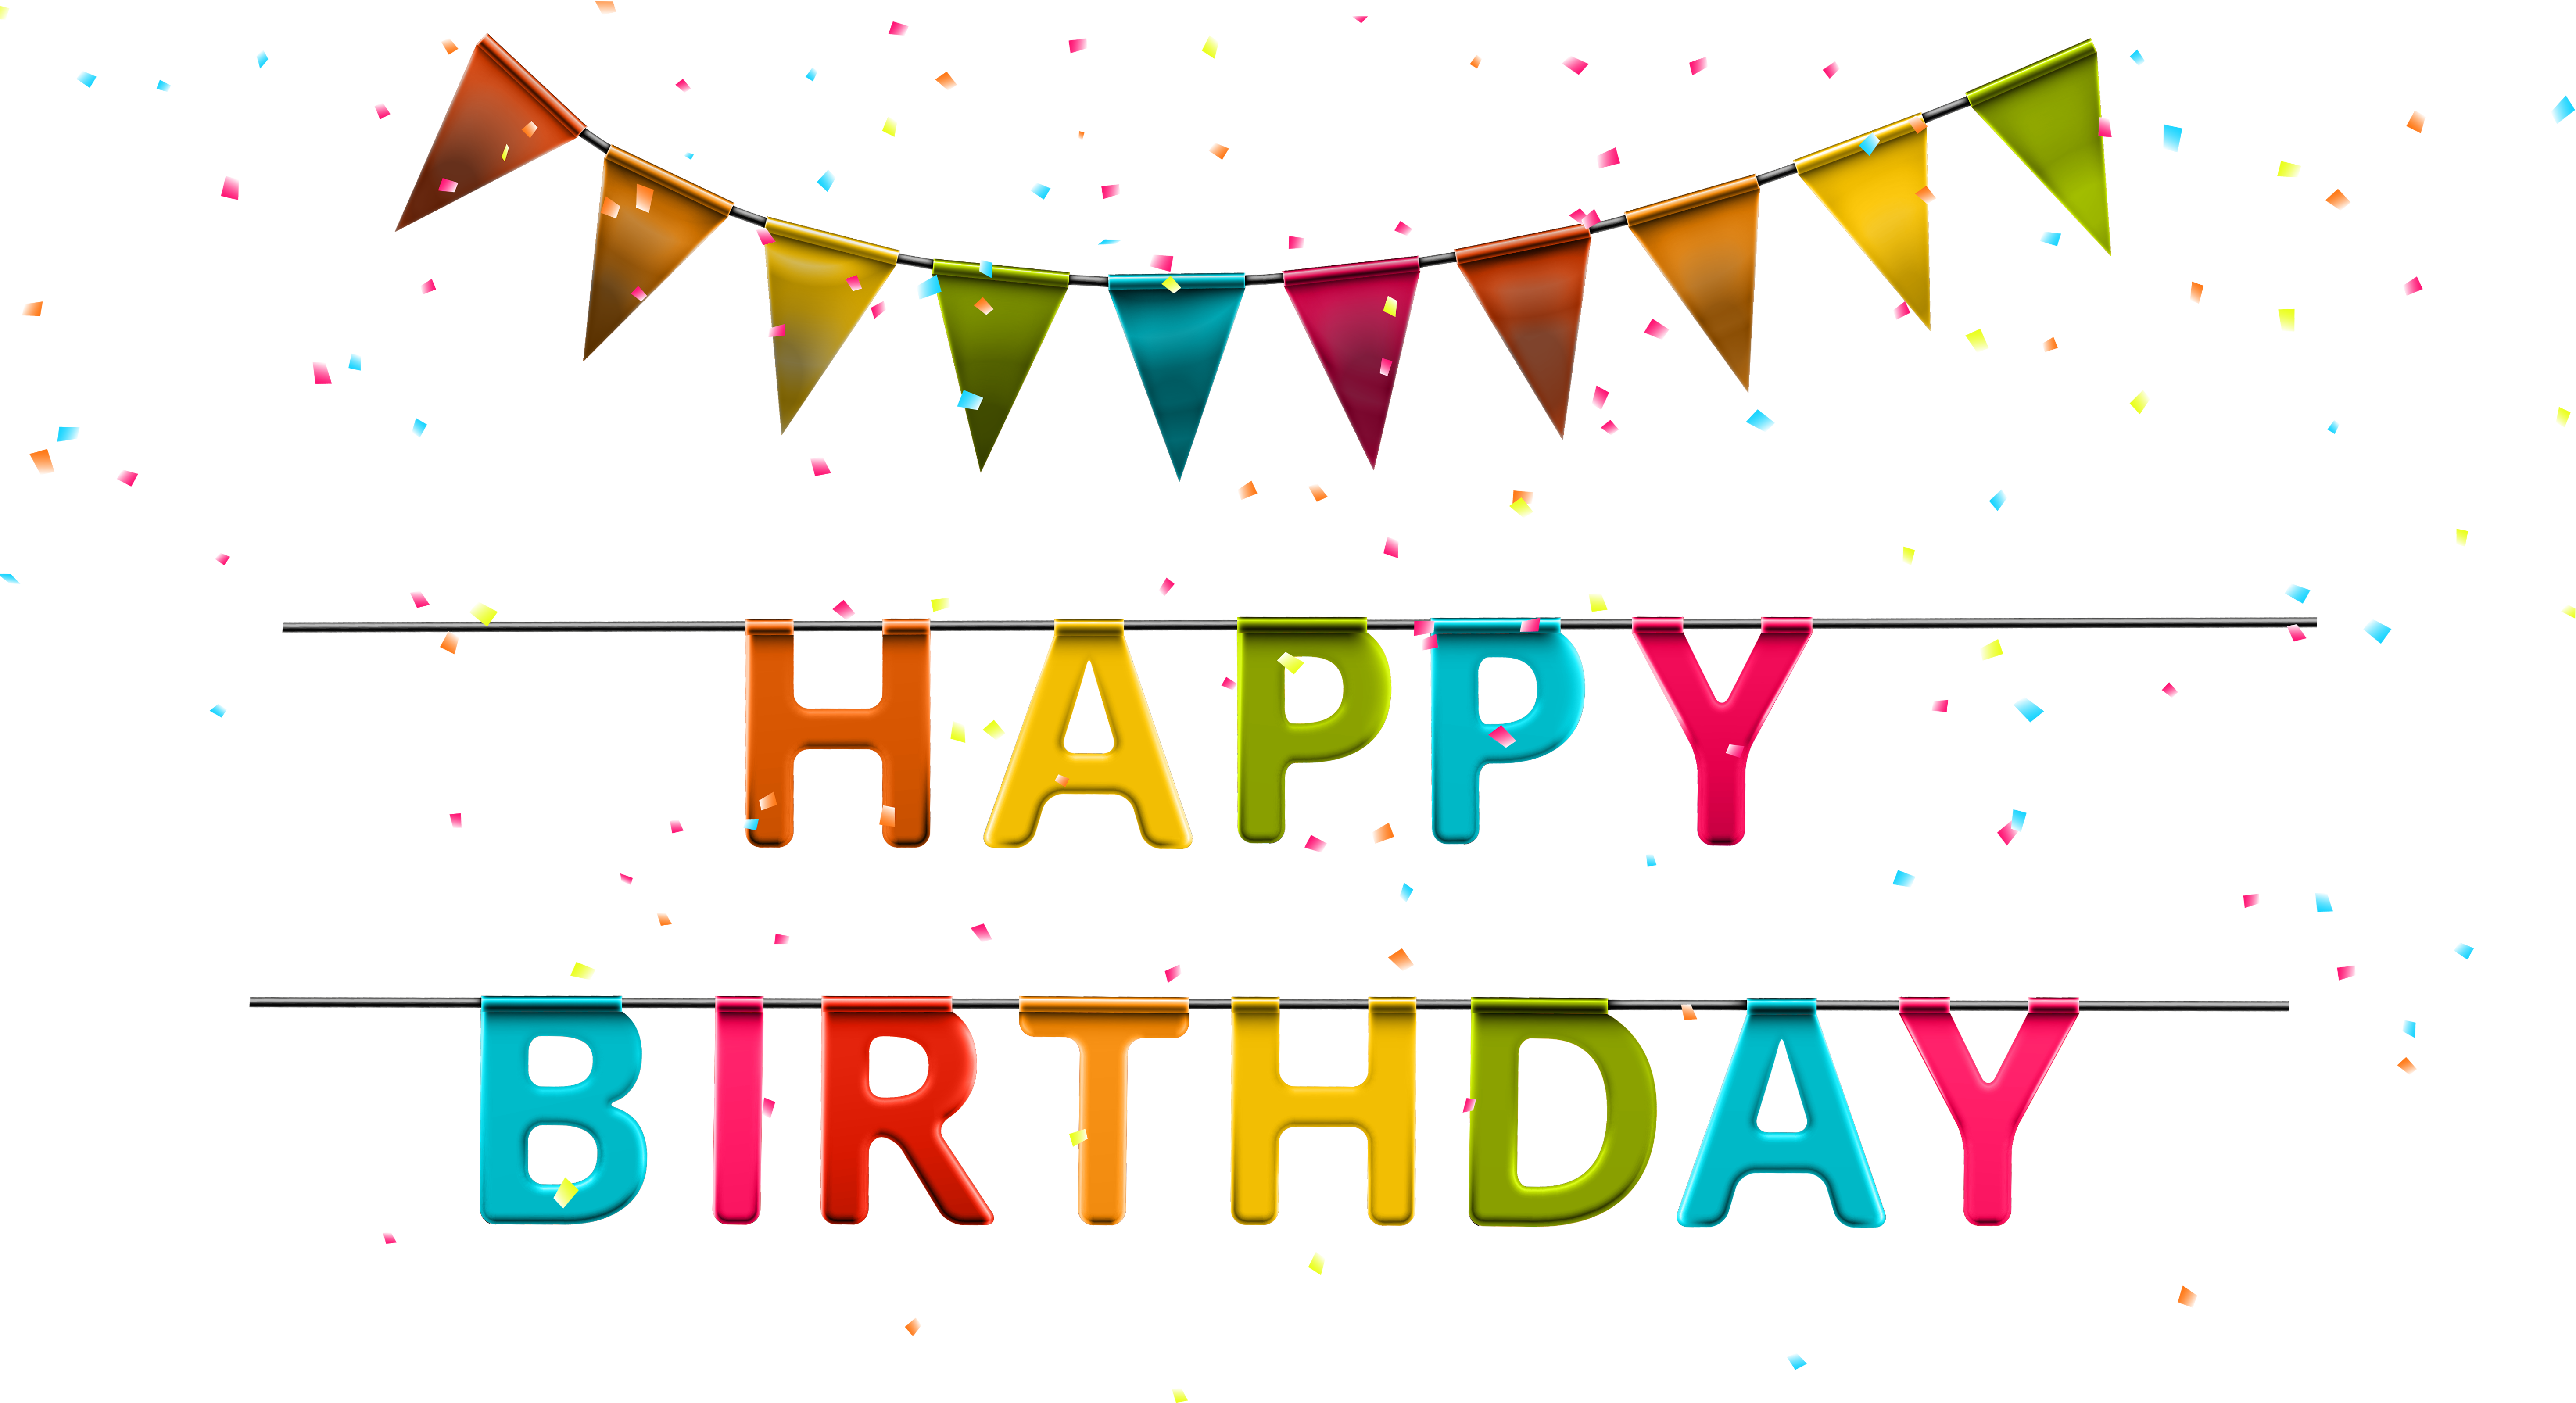 Happy Birthday With Streamer Png Clip Art Imageu200b - Graphic Design (5934x3340)